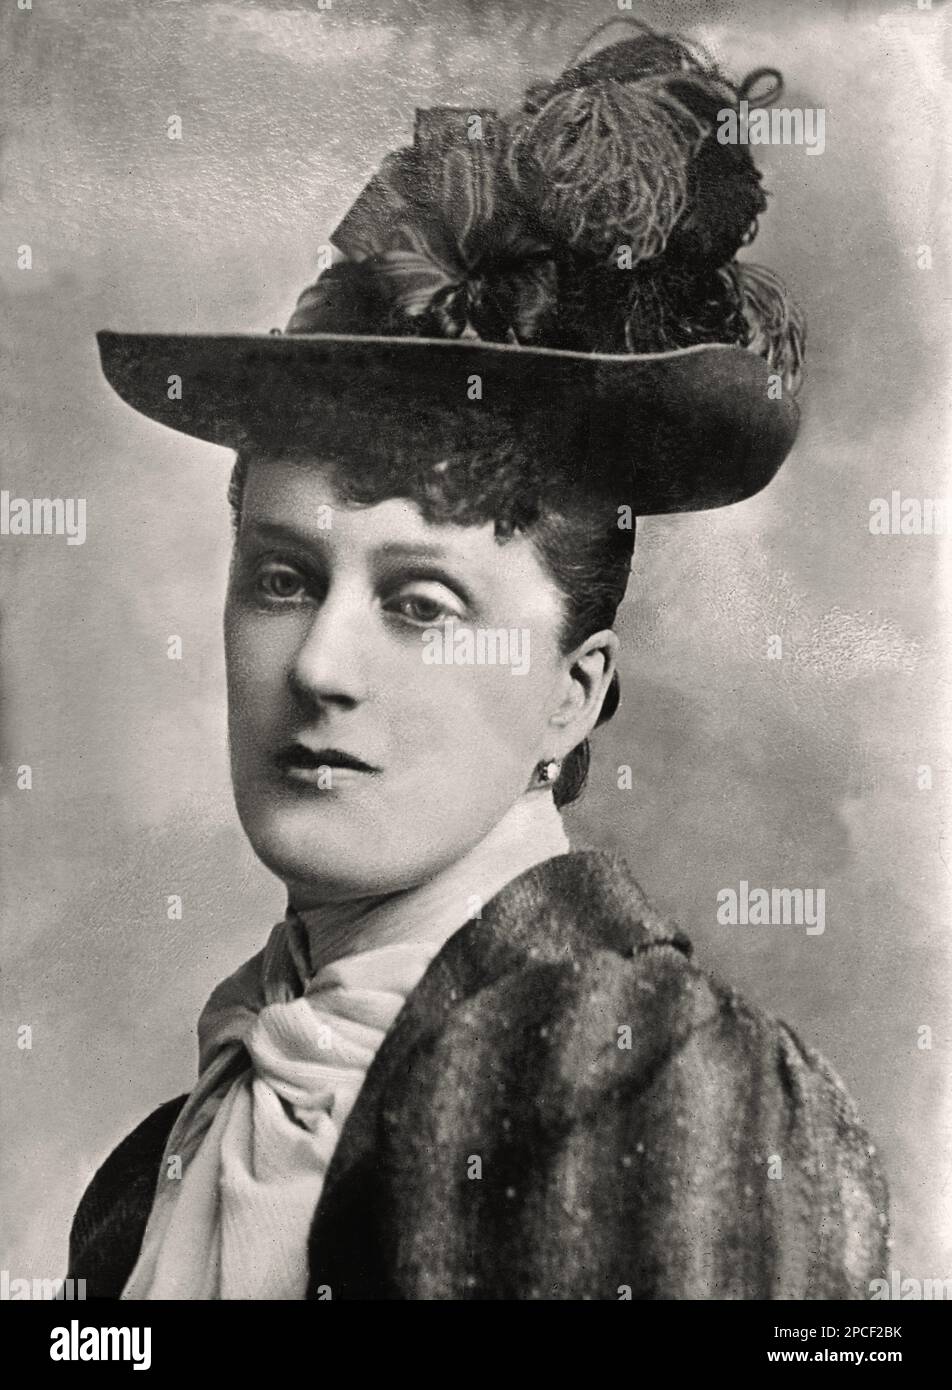 1890 ca , London , England : The Lady Duchess Winifred Ellen GORE of ARRAN born Winifred Ellen Reilly ( dead in 1921 ), daughter of John Reilly and Hon. Augusta Sudgen . She married, firstly, Lieutenant Hon. John Montagu Stopford, son of James Thomas Stopford, 4th Earl of Courtown and Dora Pennefather, on 1881 . She married, secondly in 1889 Arthur Saunders Gore , 5th Earl of Arran KP ( 1839 - 1901 ), known as Viscount Sudley from 1839 to 1884, was an Anglo-Irish peer and diplomat . They had one daughter Lady Winifred Helena Lettice Gore ( 1891 -1958 ), unmarried.  Lord Arran died in March 190 Stock Photo